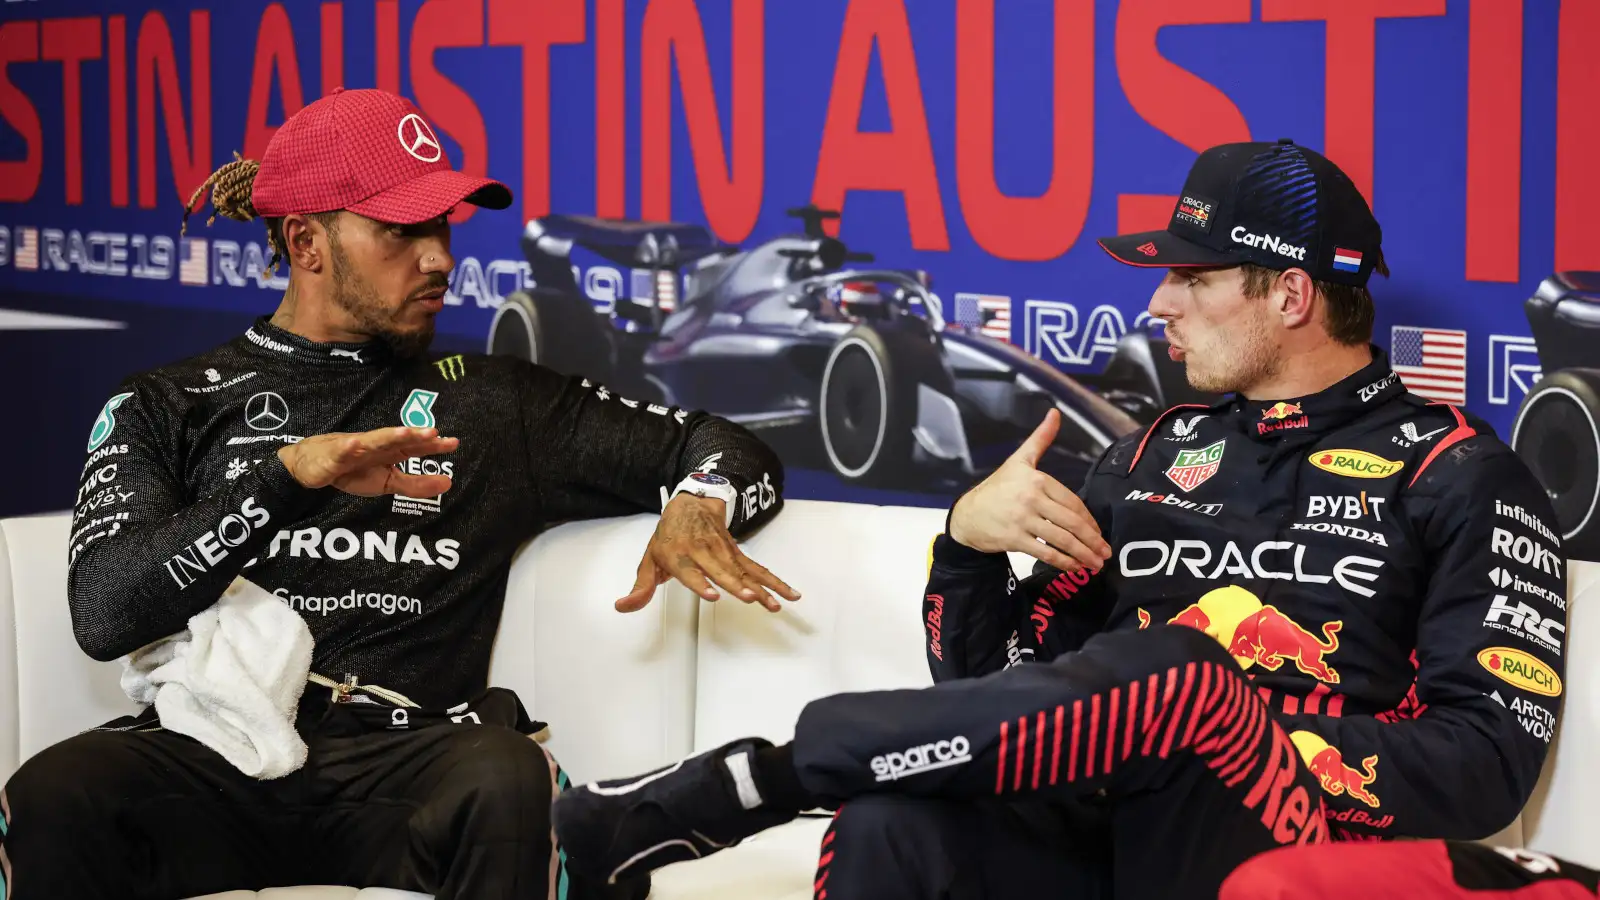 Lewis Hamilton and Max Verstappen discuss the Sprint race.